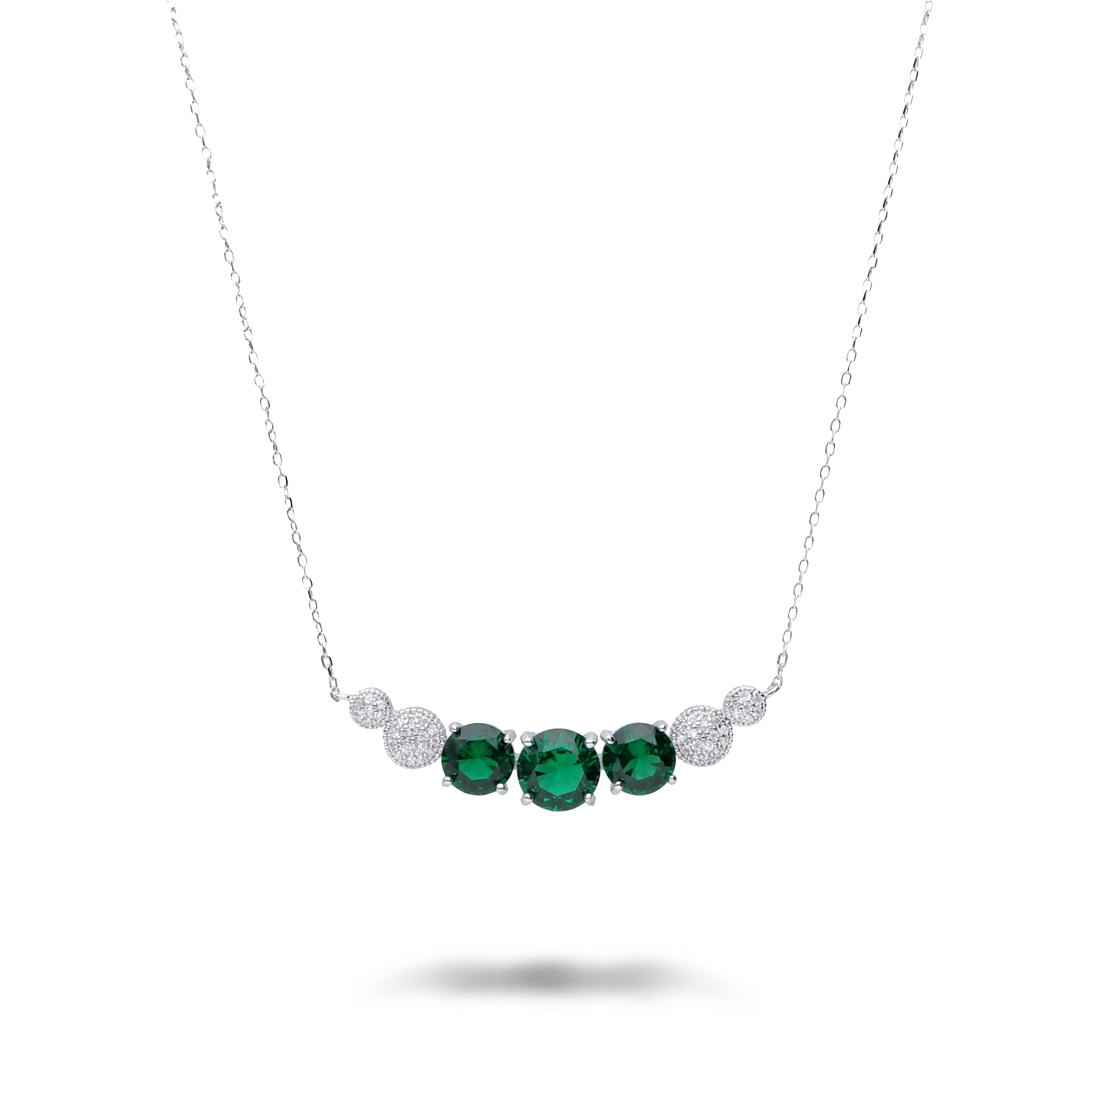 Silver necklace with green and white stones - ORO&CO 925